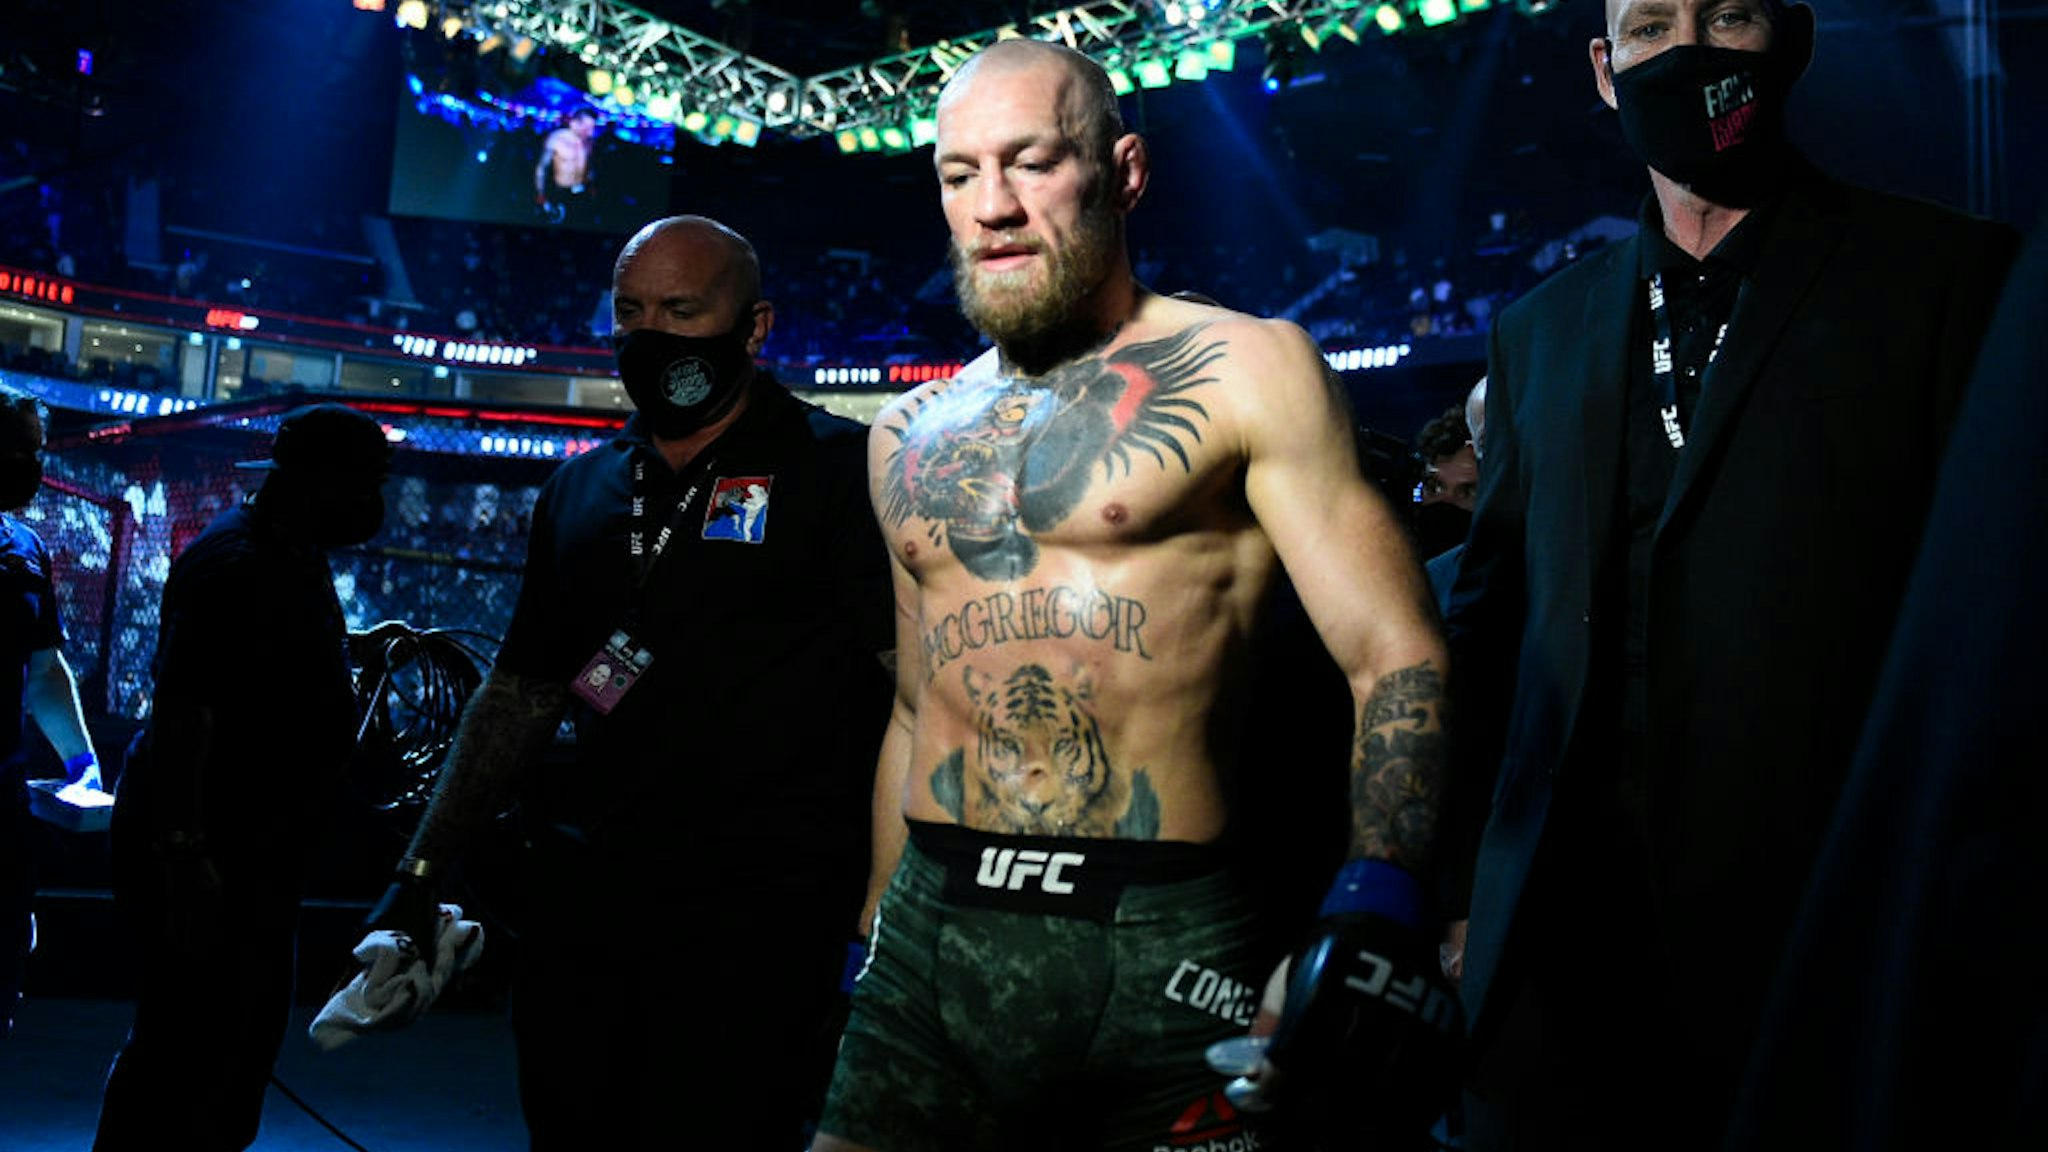 ABU DHABI, UNITED ARAB EMIRATES - JANUARY 23: Conor McGregor of Ireland reacts after his TKO loss to Dustin Poirier in a lightweight fight during the UFC 257 event inside Etihad Arena on UFC Fight Island on January 23, 2021 in Abu Dhabi, United Arab Emirates. (Photo by Chris Unger/Zuffa LLC)